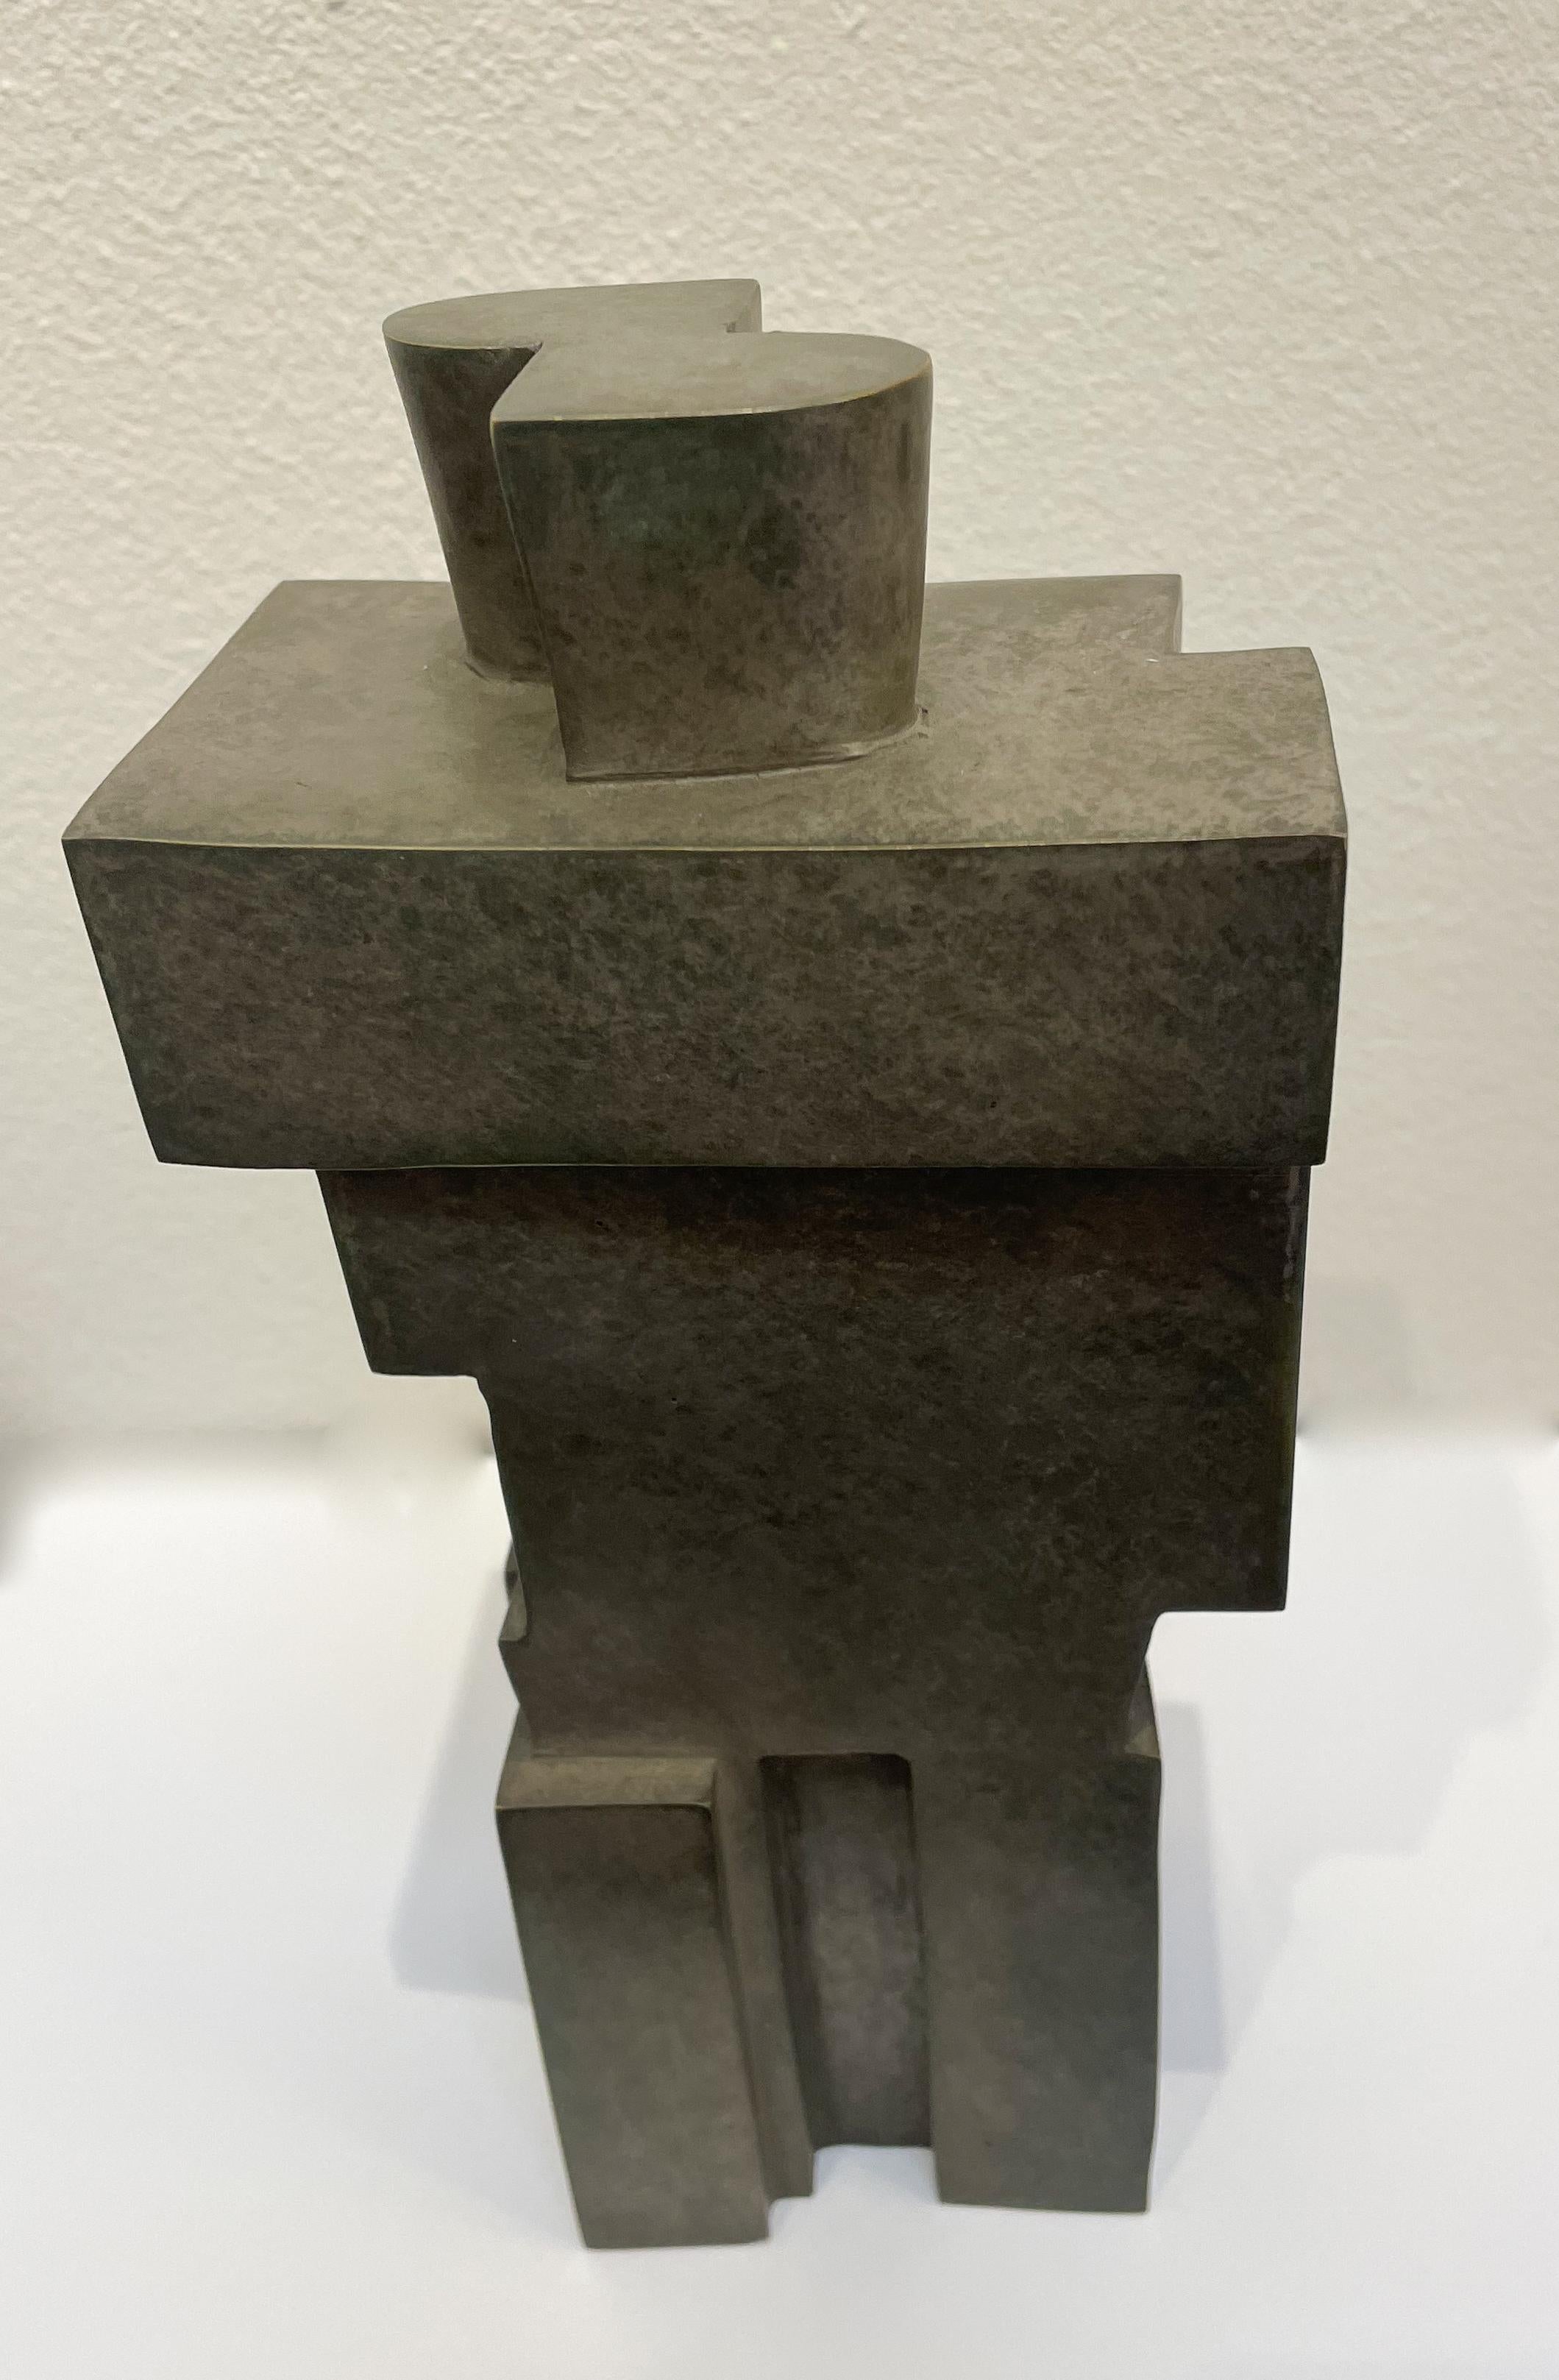 Cubist bronze sculpture 'The Twins' by Willy Kessels - 1920s

Cubist bronze 'the twins' from the 1920s famous and well known Belgian sculptor, architect and photographer Willy Kessels. Especially as a photographer Willy Kessels is considered one